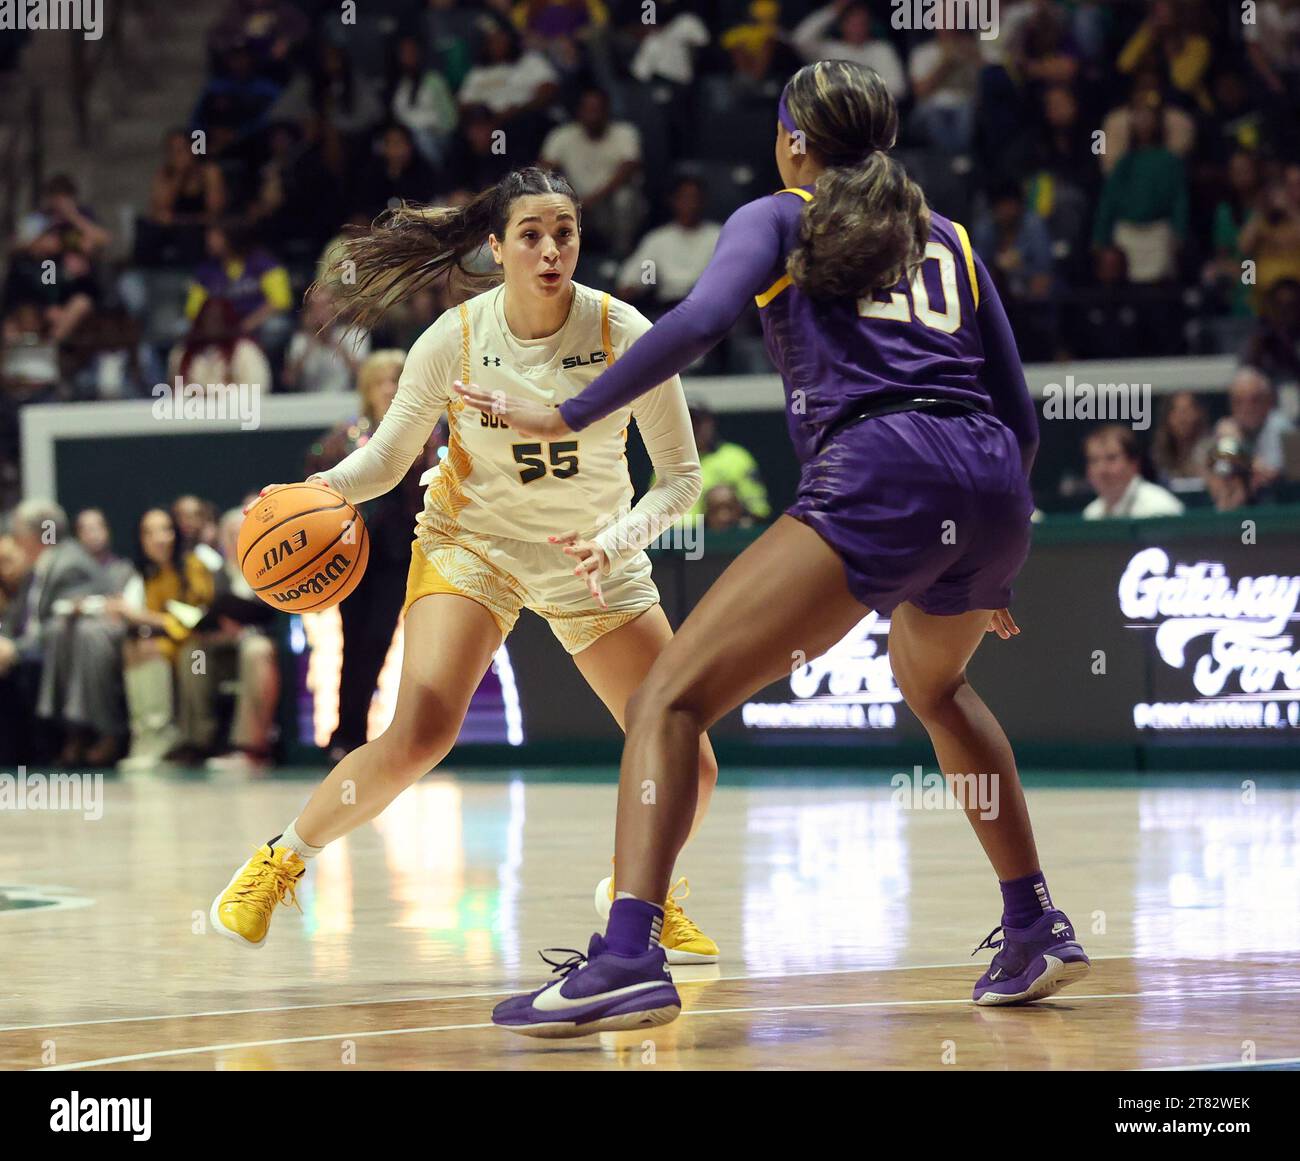 Hammond, USA. 17th Nov, 2023. SE Louisiana Lady Lions guard Hailey Giaratano (55) tries to make a move on LSU Lady Tigers guard Janae Kent (20) during a women's college basketball game at the University Center in Hammond, Louisiana on Friday, November 17, 2023. (Photo by Peter G. Forest/Sipa USA) Credit: Sipa USA/Alamy Live News Stock Photo